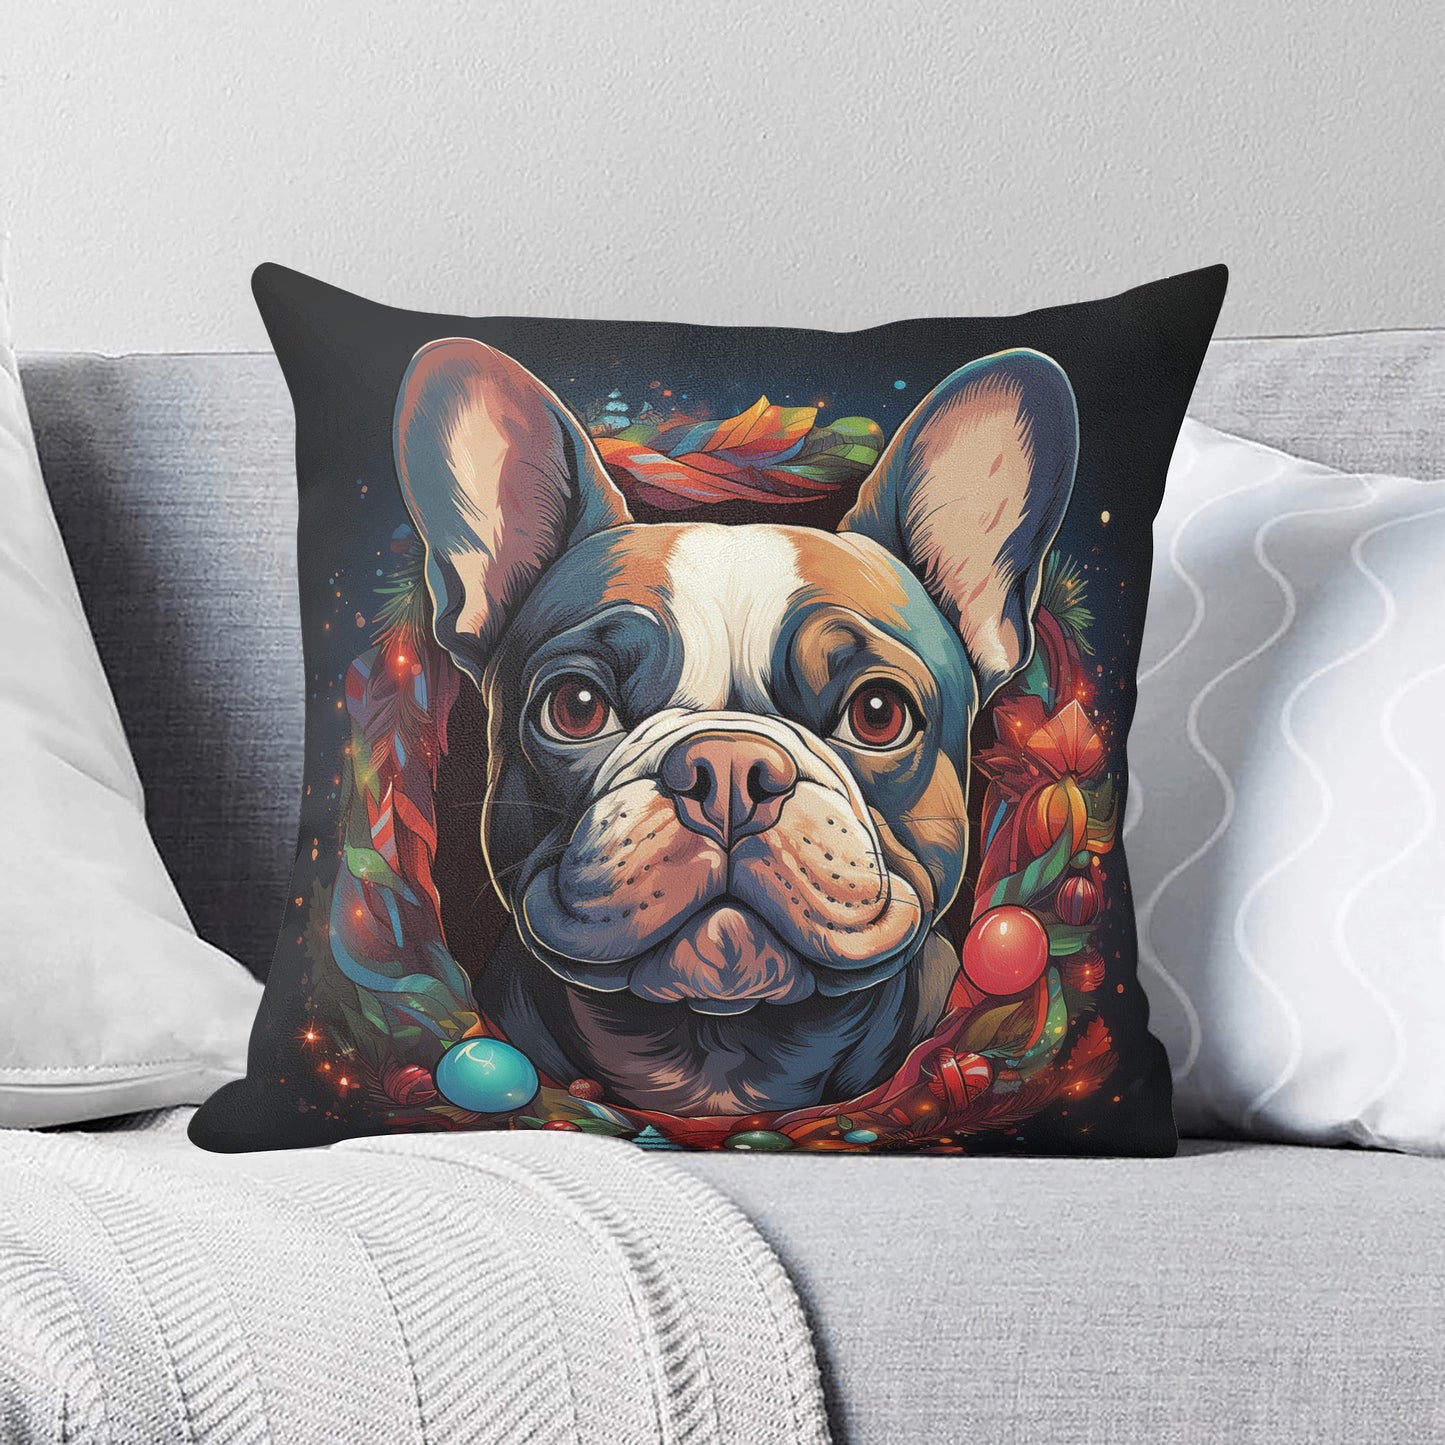 Diego - Pillow Cover